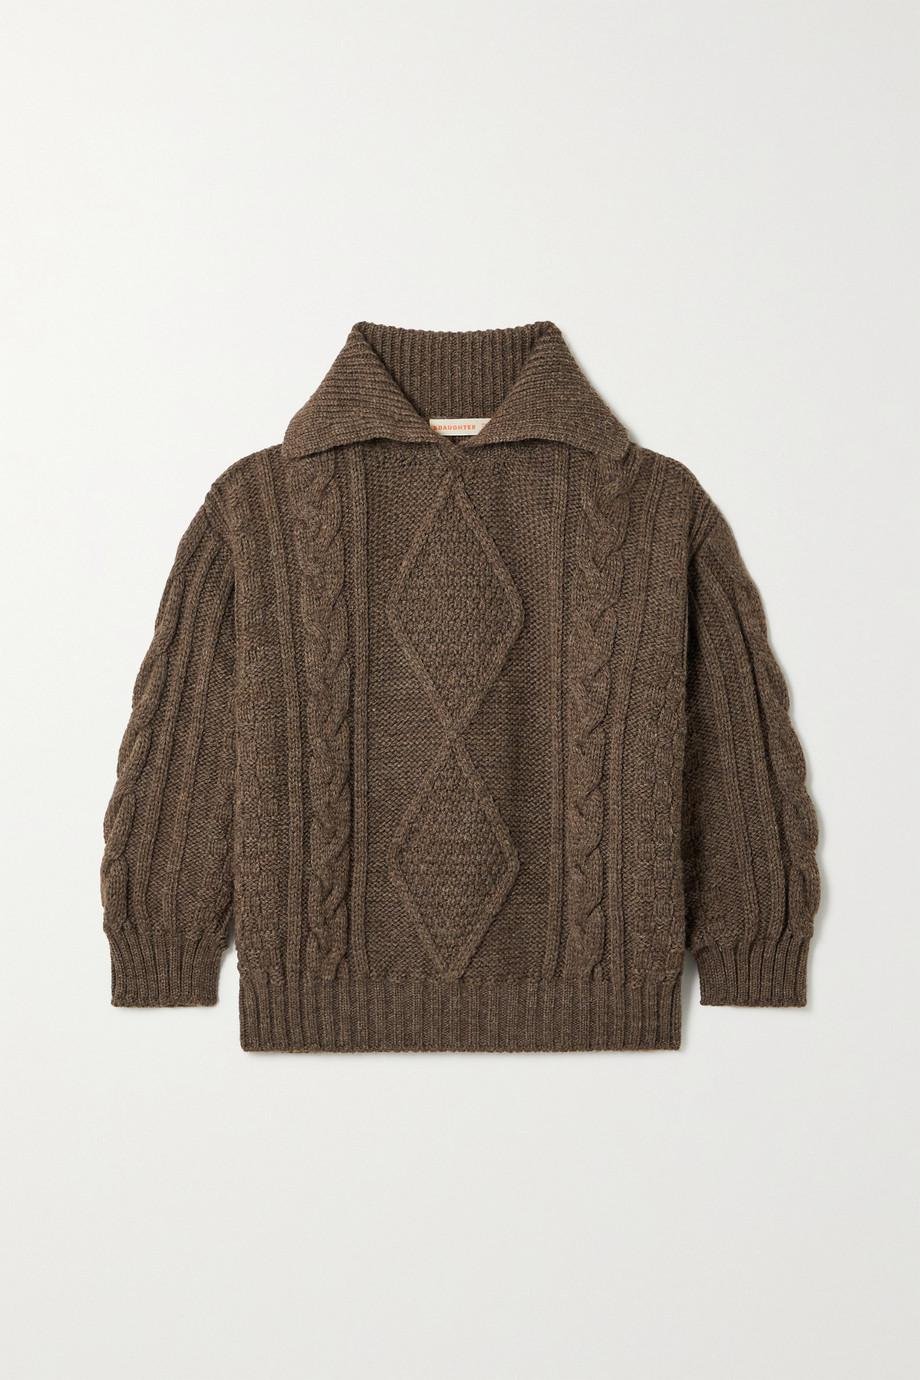 + NET SUSTAIN Kesh cable-knit wool sweater by &DAUGHTER